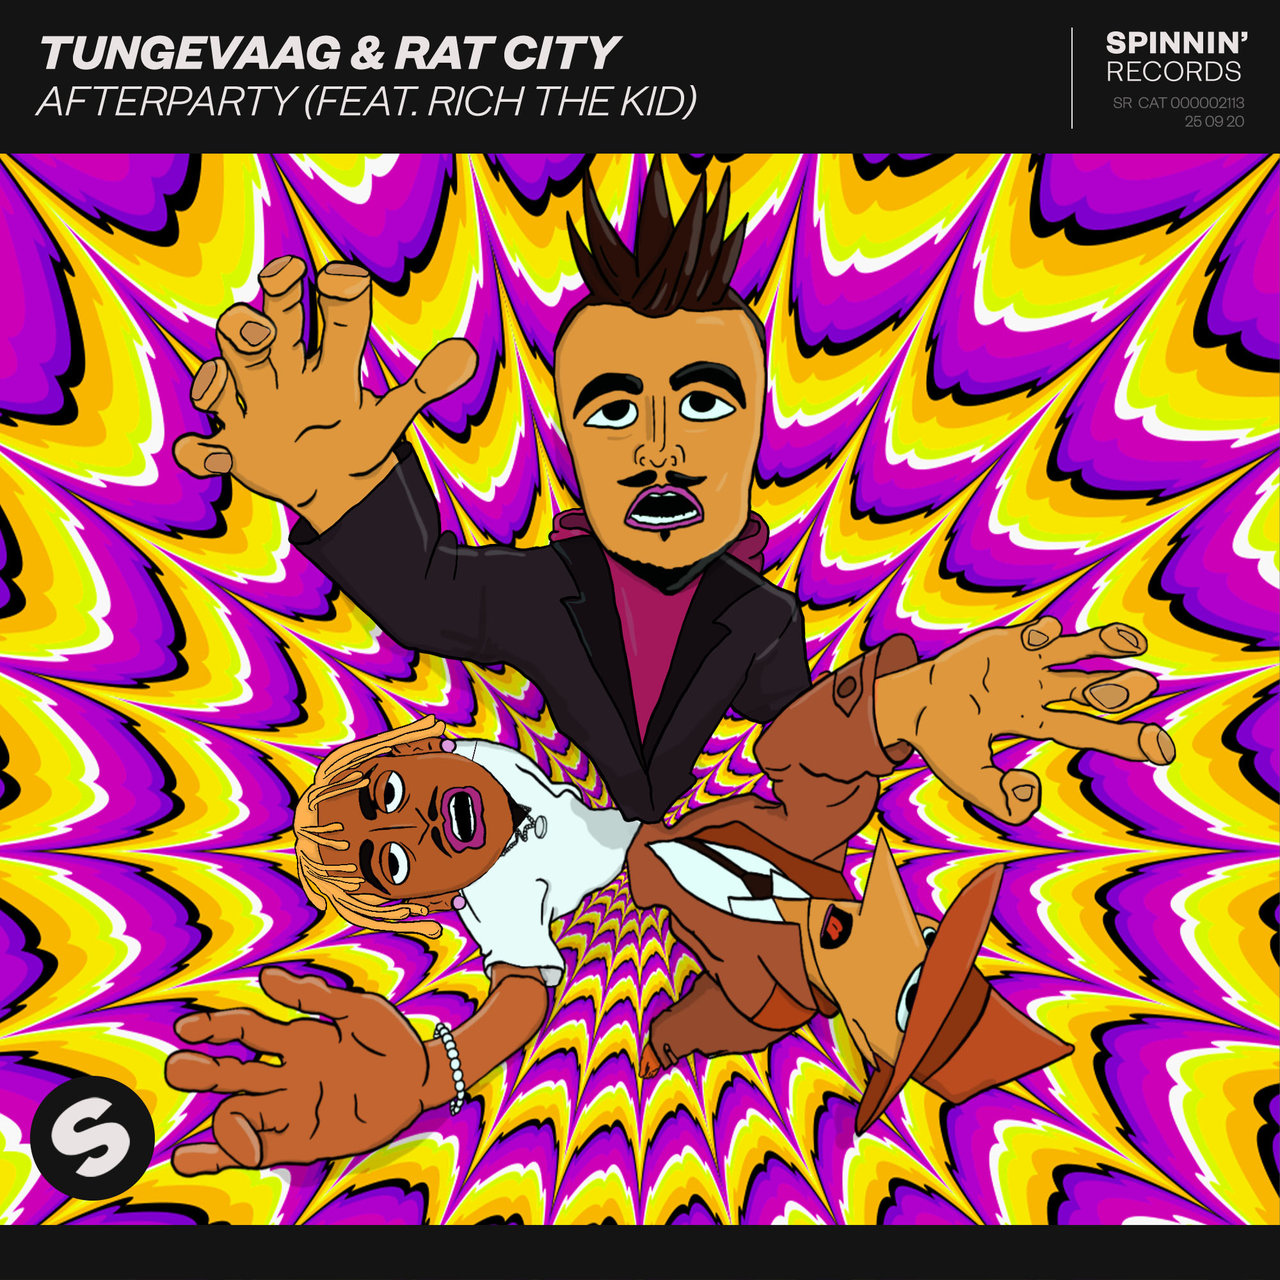 Tungevaag & Rat City ft. featuring Rich The Kid Afterparty cover artwork